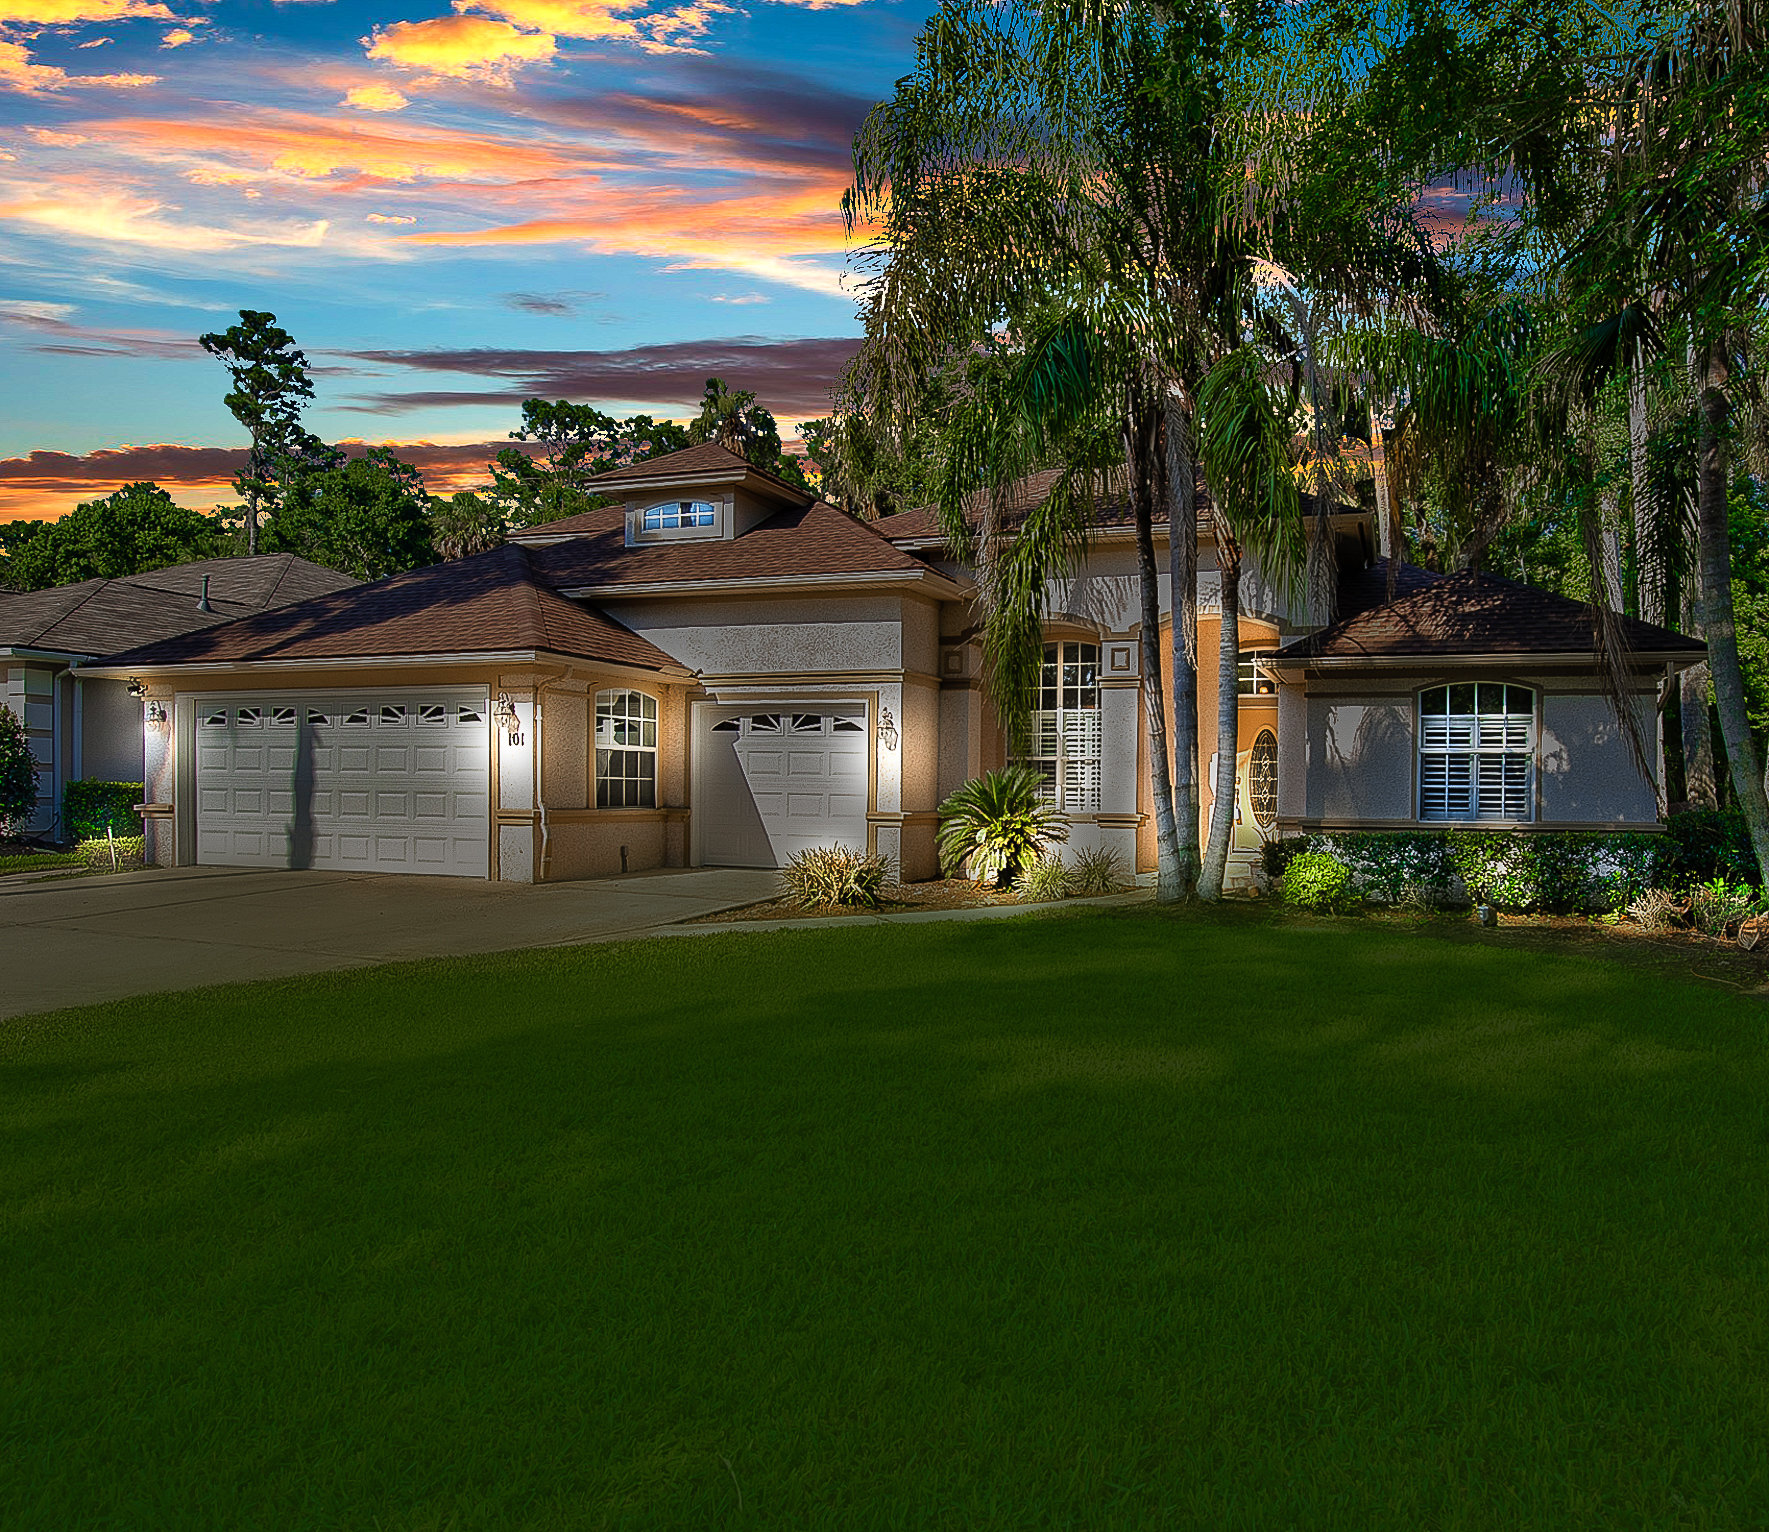 101 old mill ct ponte vedra beach front of house at sunset